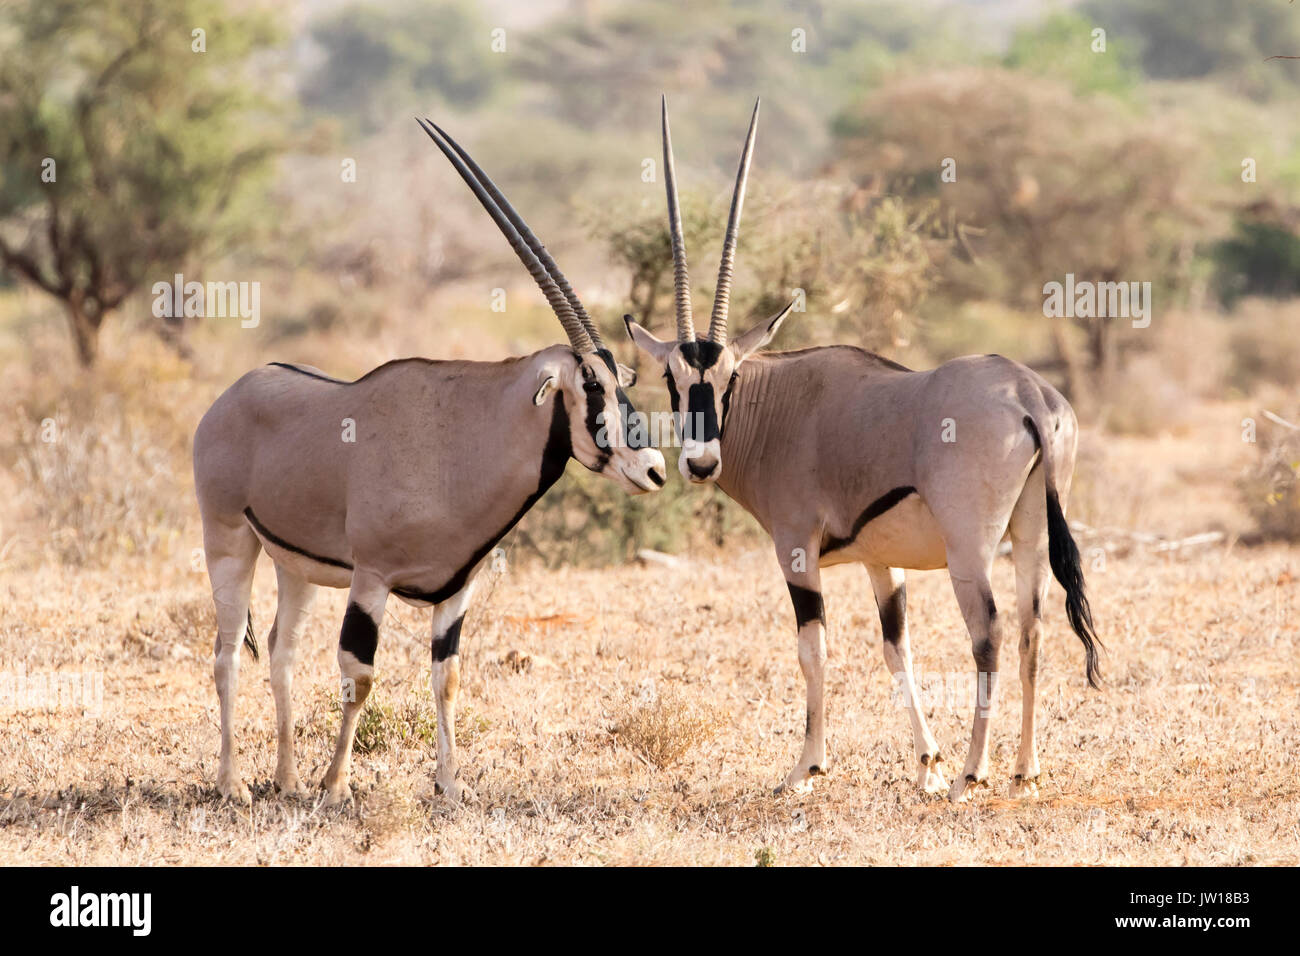 Oryx (Oryx gazelle) standing side by side, heads next to each other Stock Photo